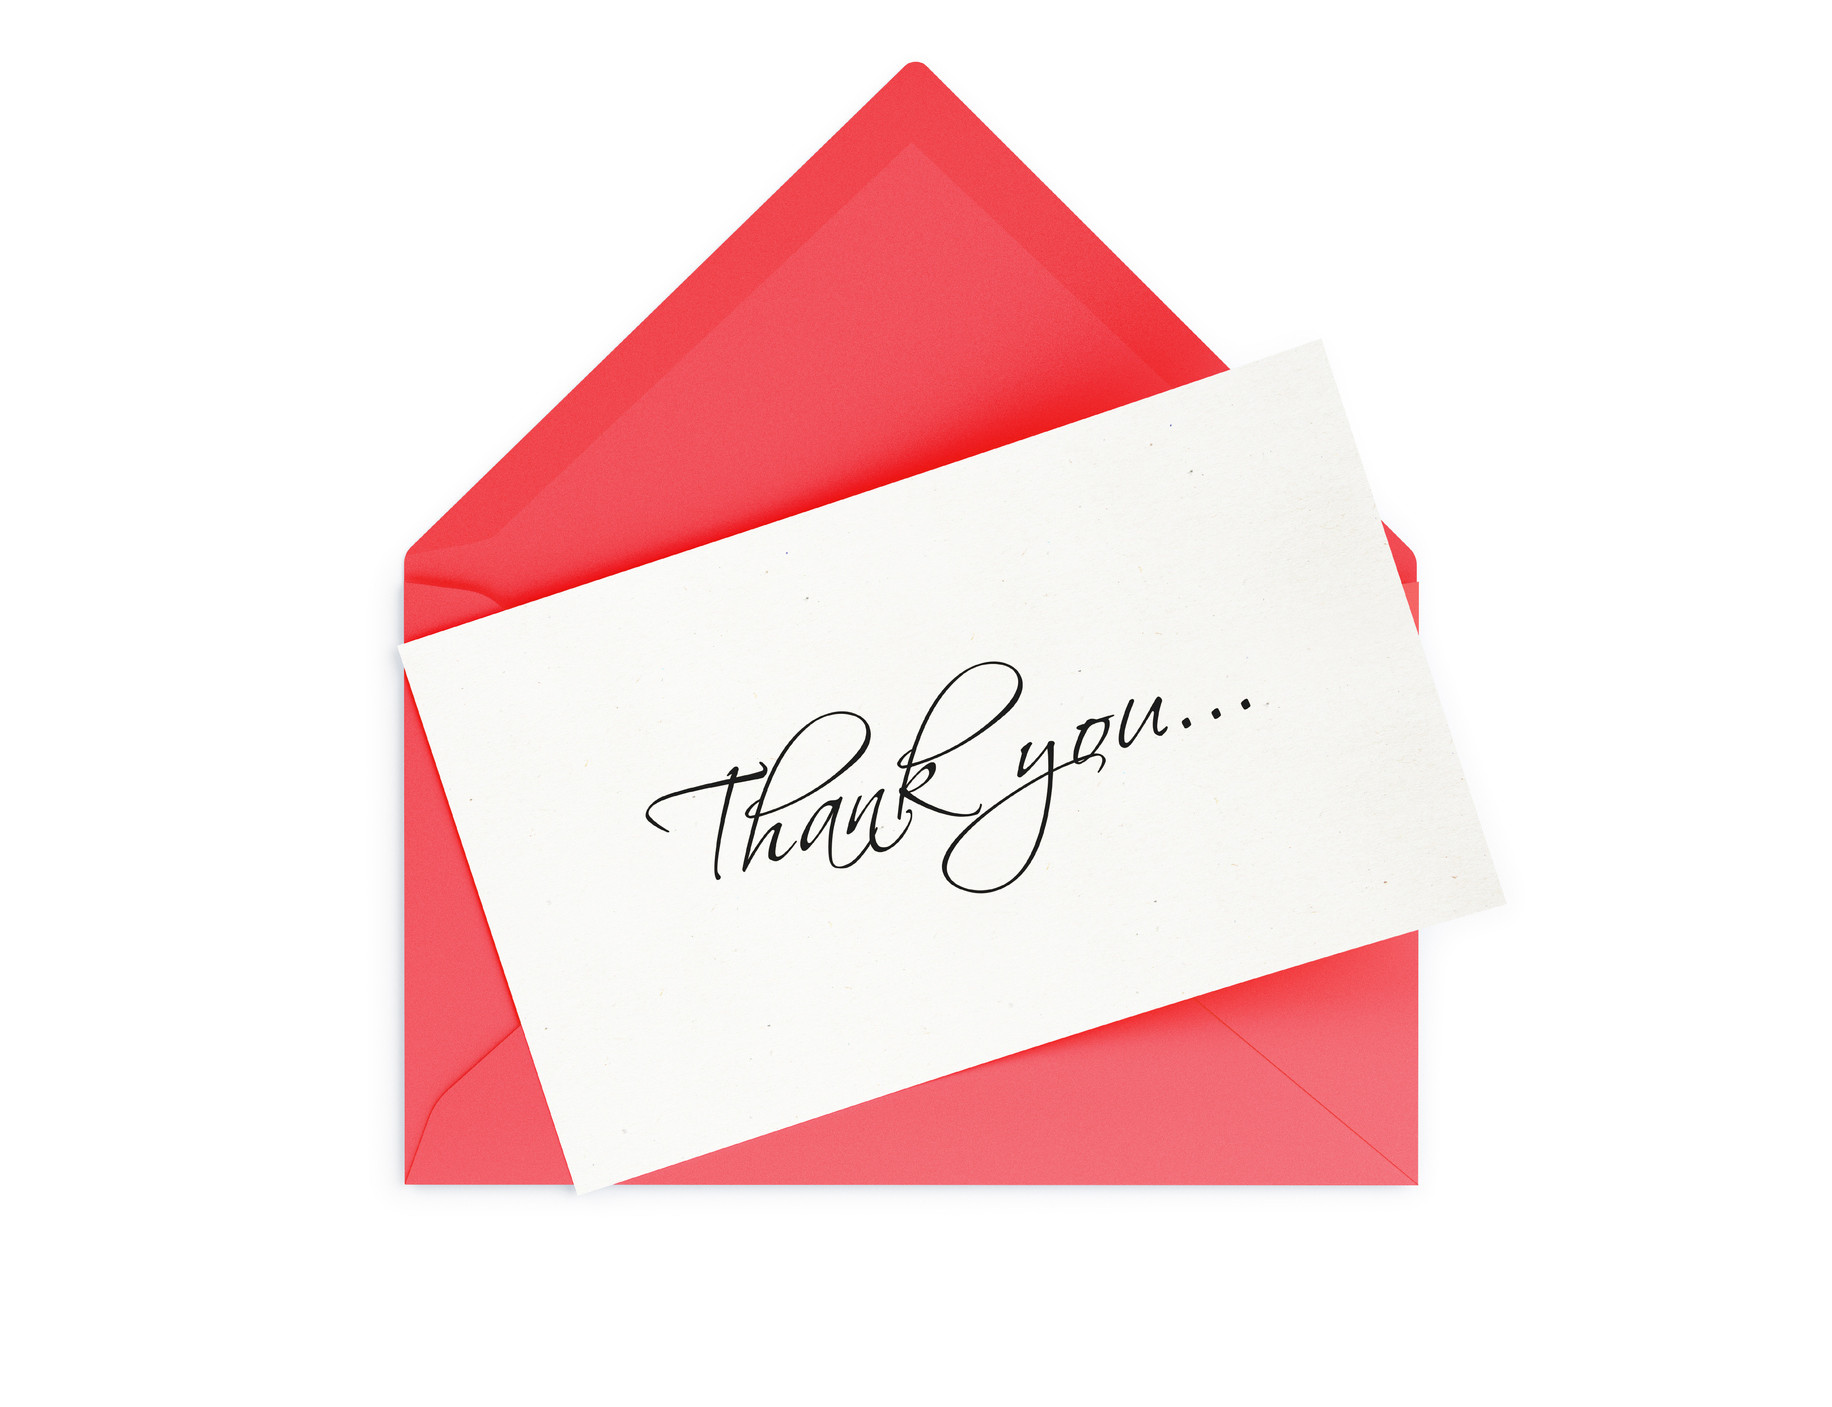 Do You Send A Thank You Note for A Mass Card Send A Thank You Letter to Patients and Generate Referrals